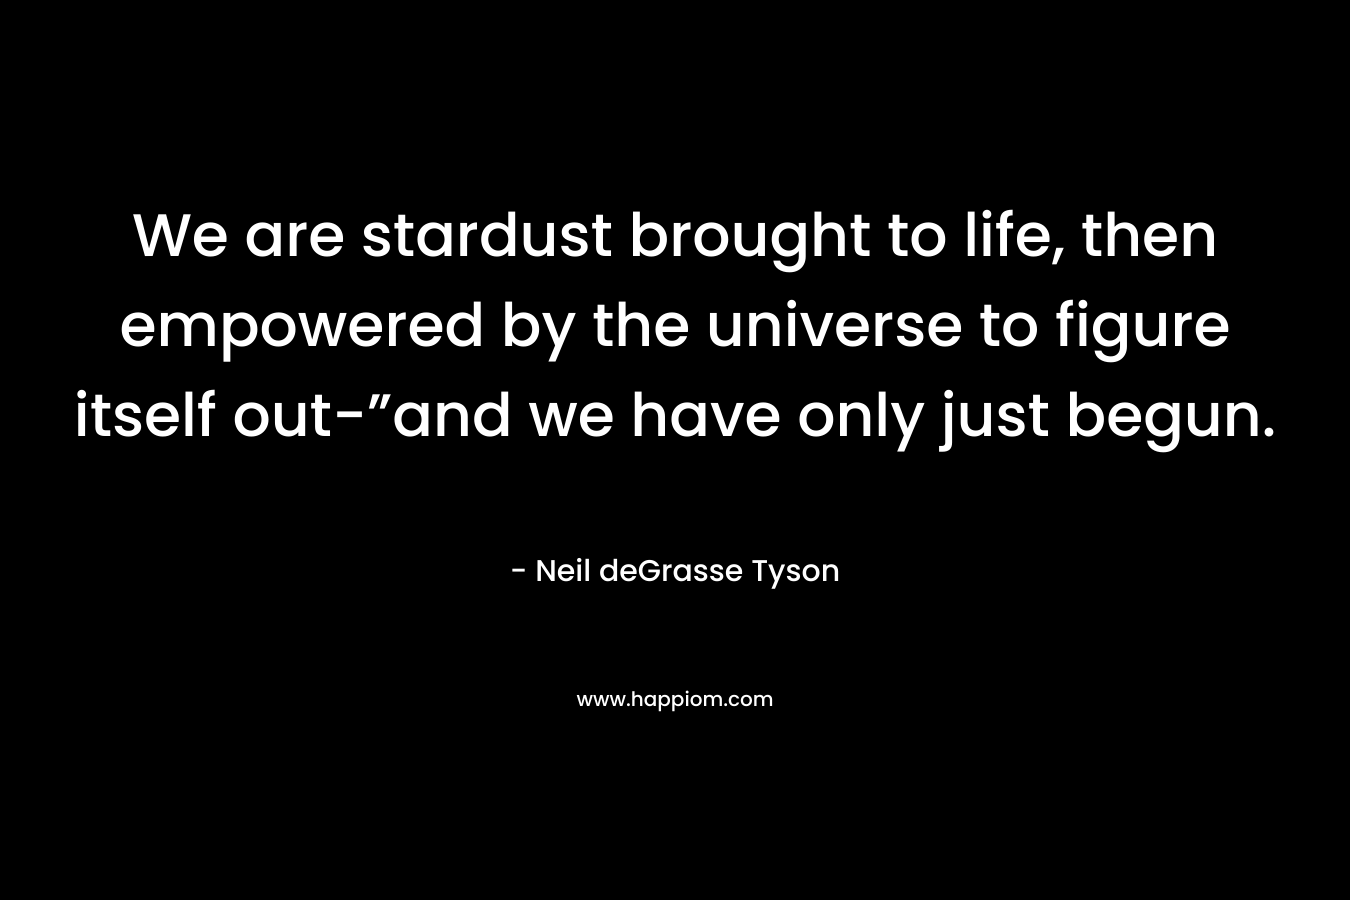 We are stardust brought to life, then empowered by the universe to figure itself out-”and we have only just begun. – Neil deGrasse Tyson